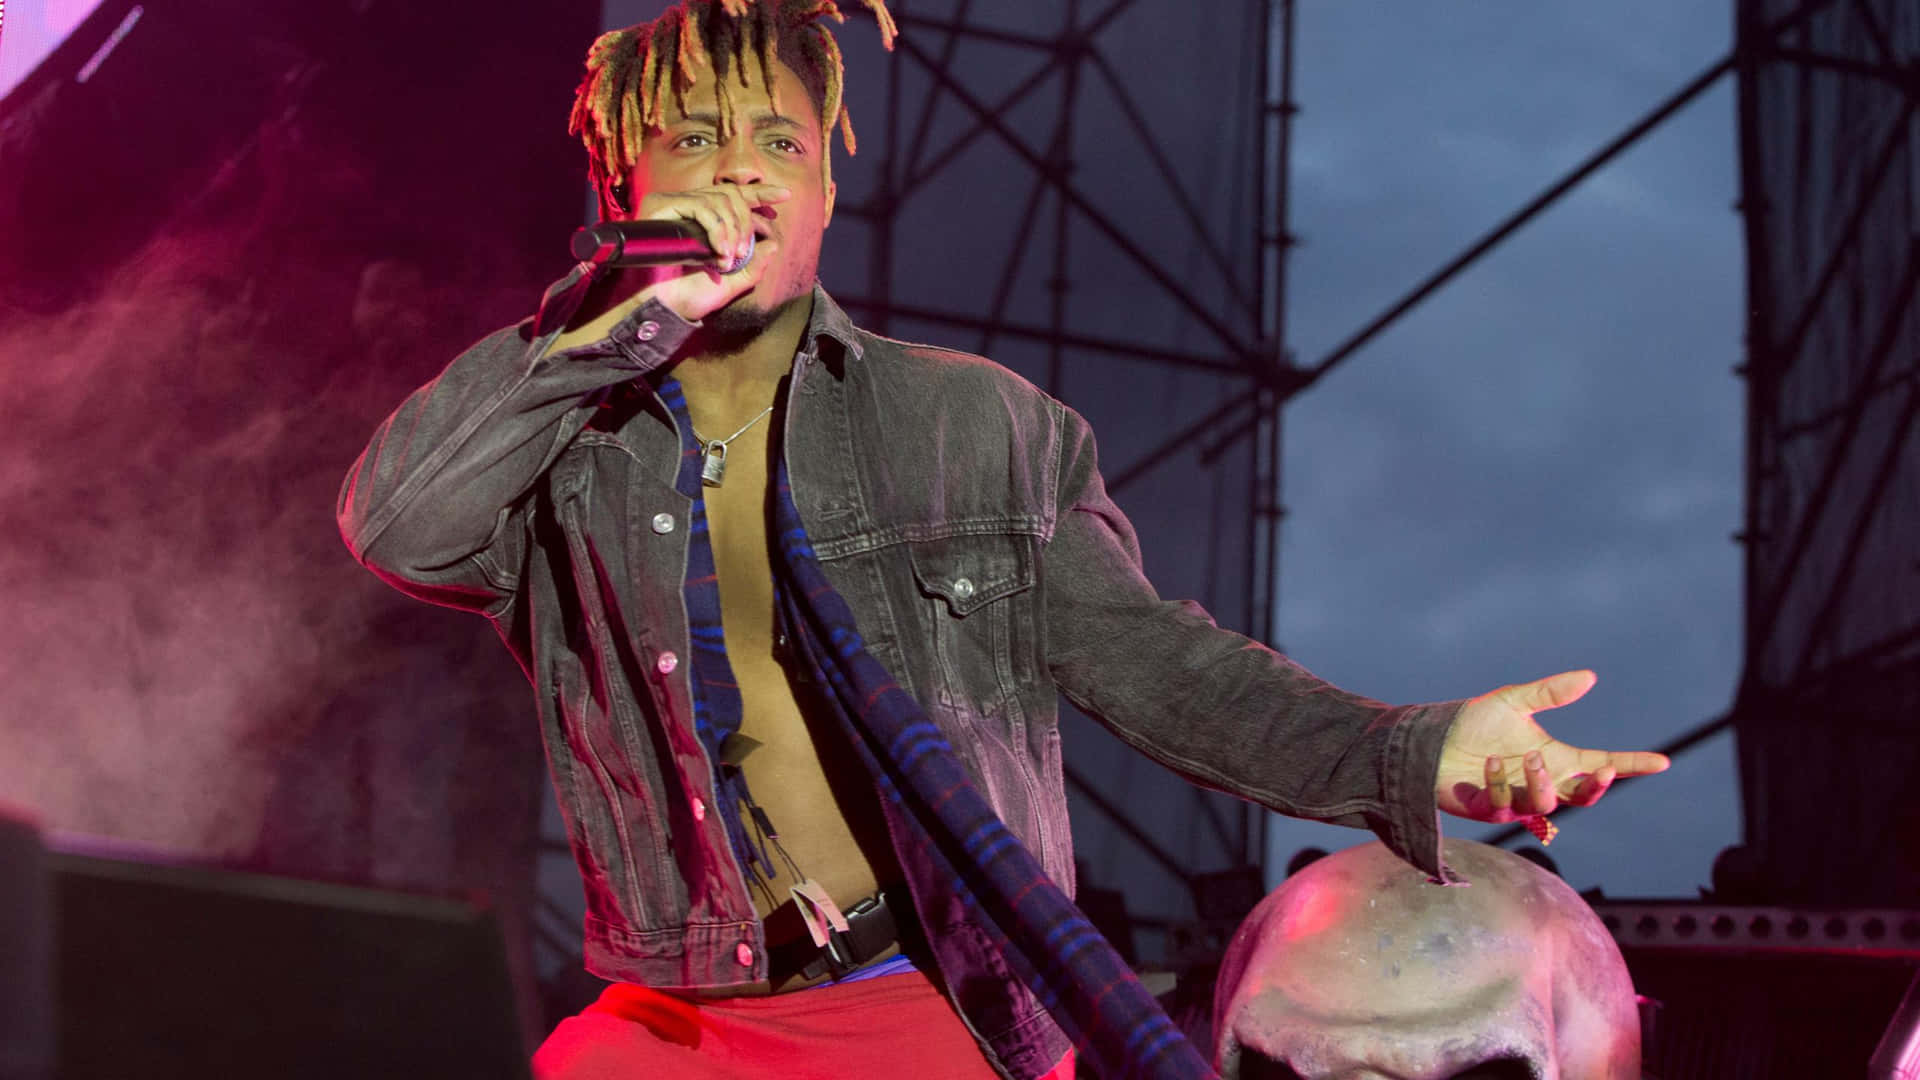 Enjoying the music from Juice Wrld live in concert Wallpaper